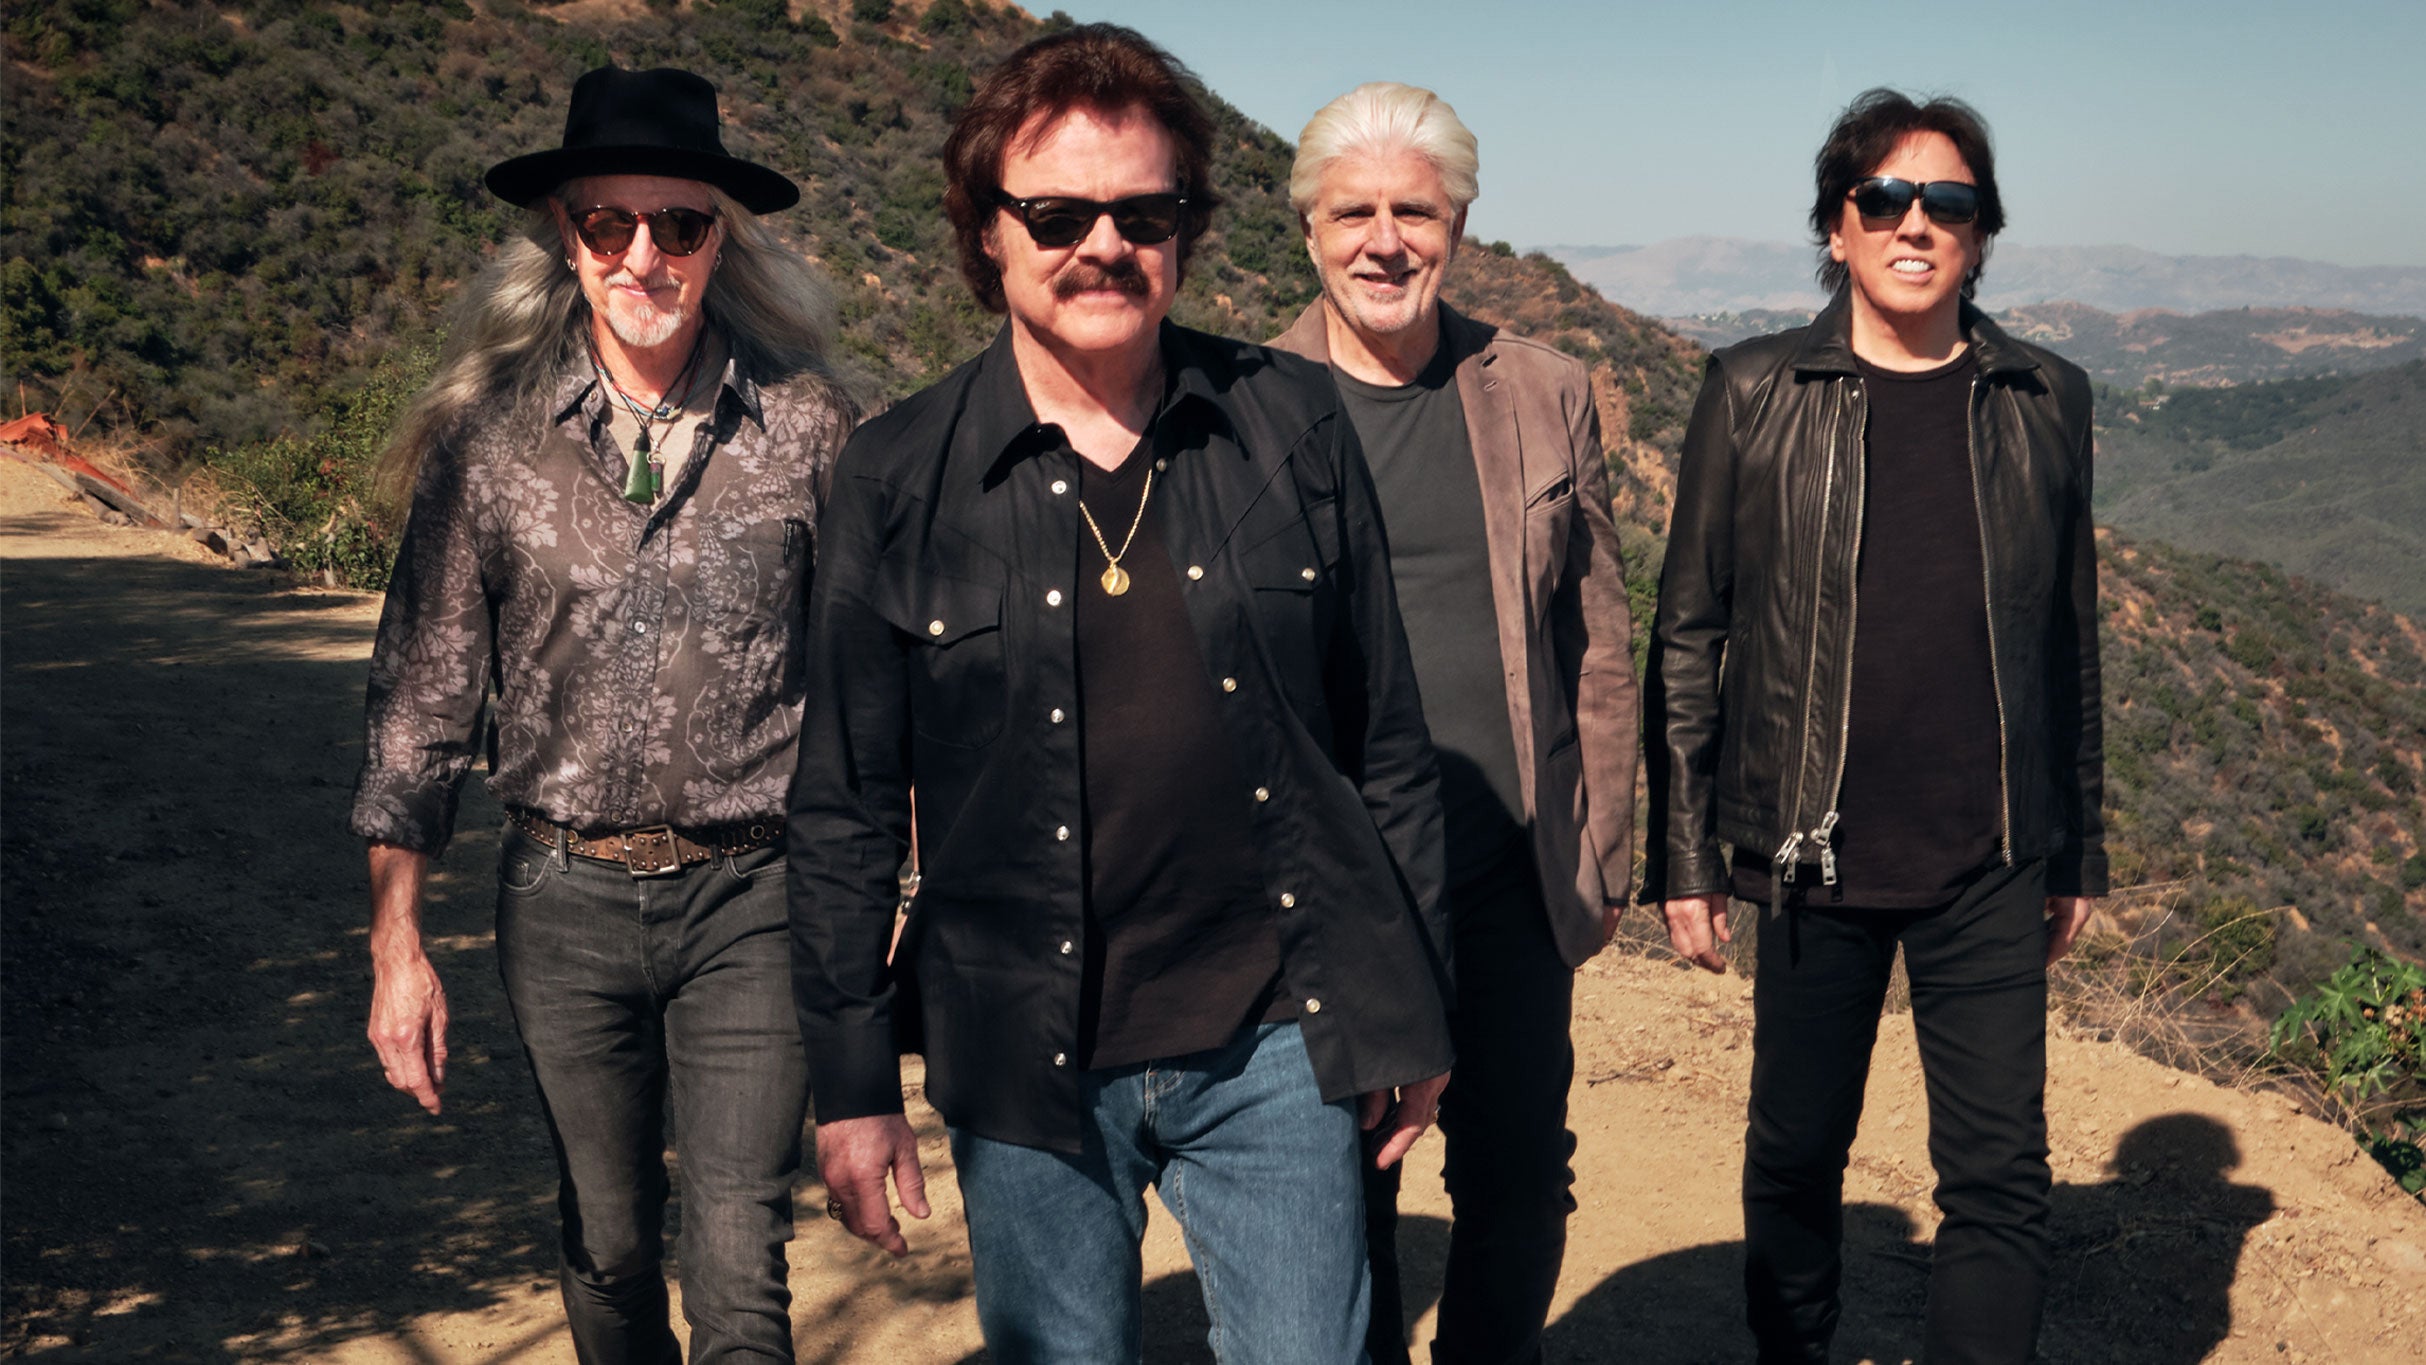 The Doobie Brothers free pre-sale code for early tickets in Edmonton